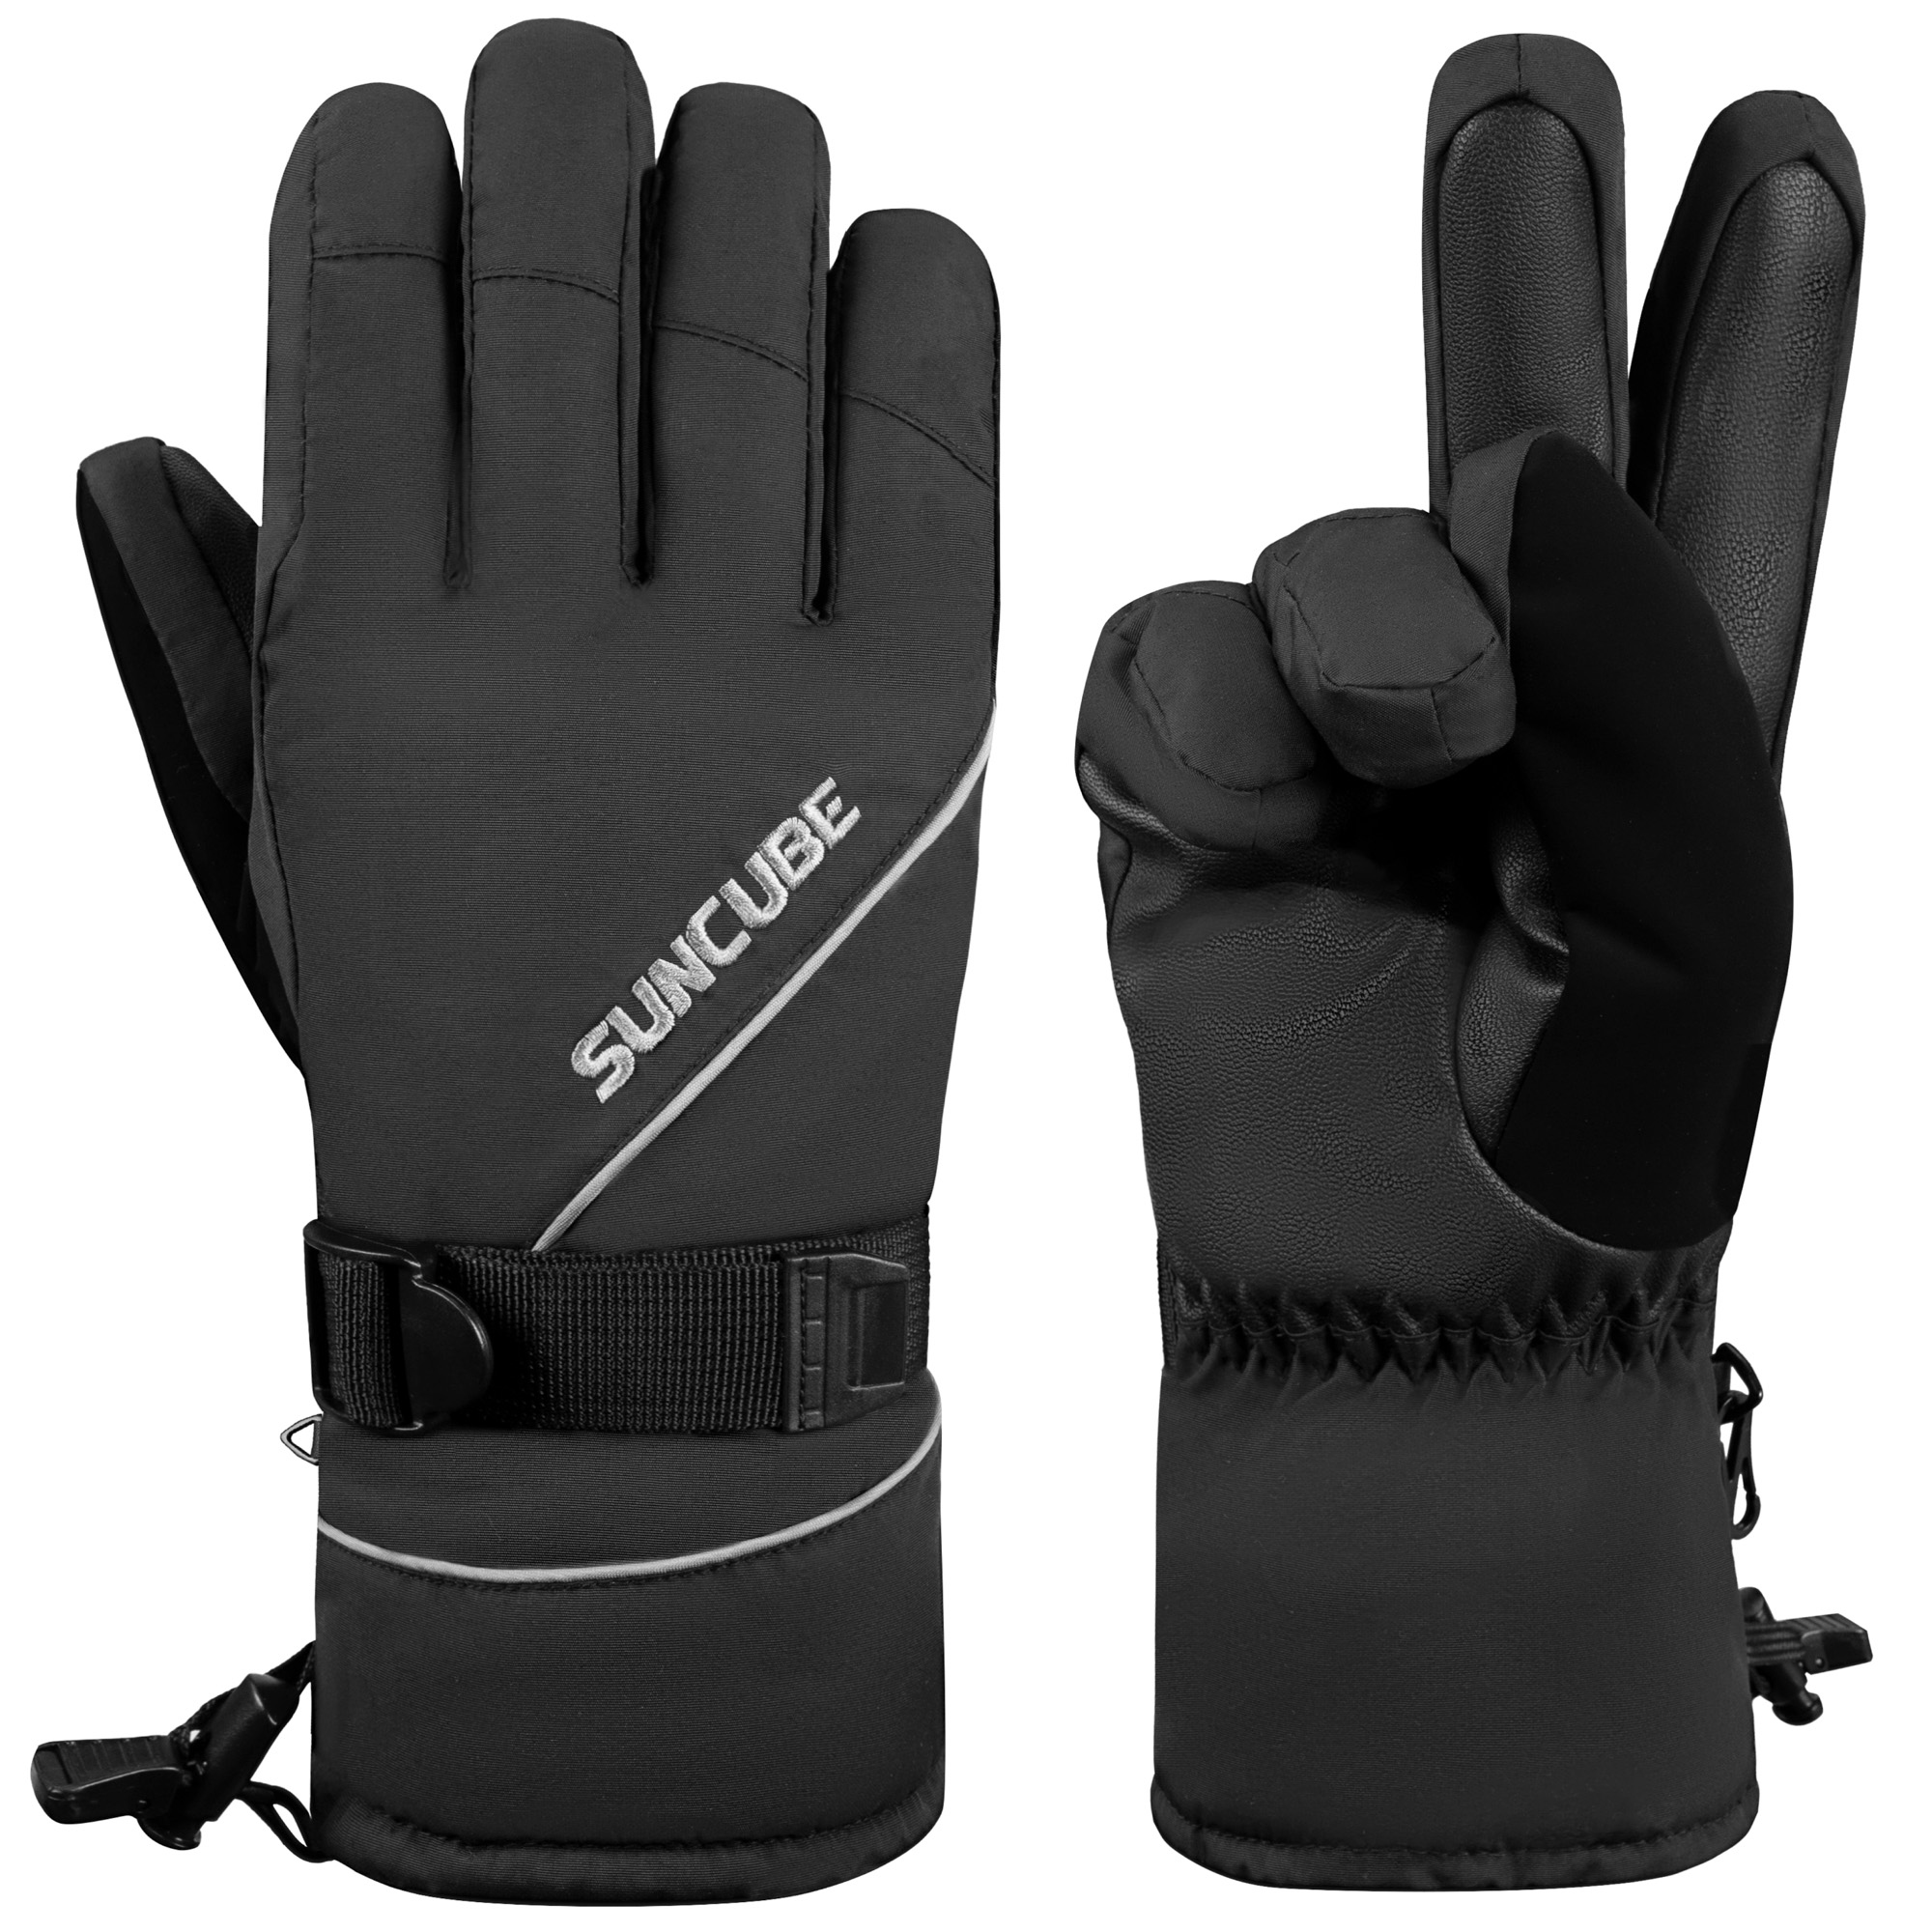 20C MENS THERMAL SKI SNOWBOARD GLOVES INSULATED WATERPROOF WINTER SPORTS SNOW 